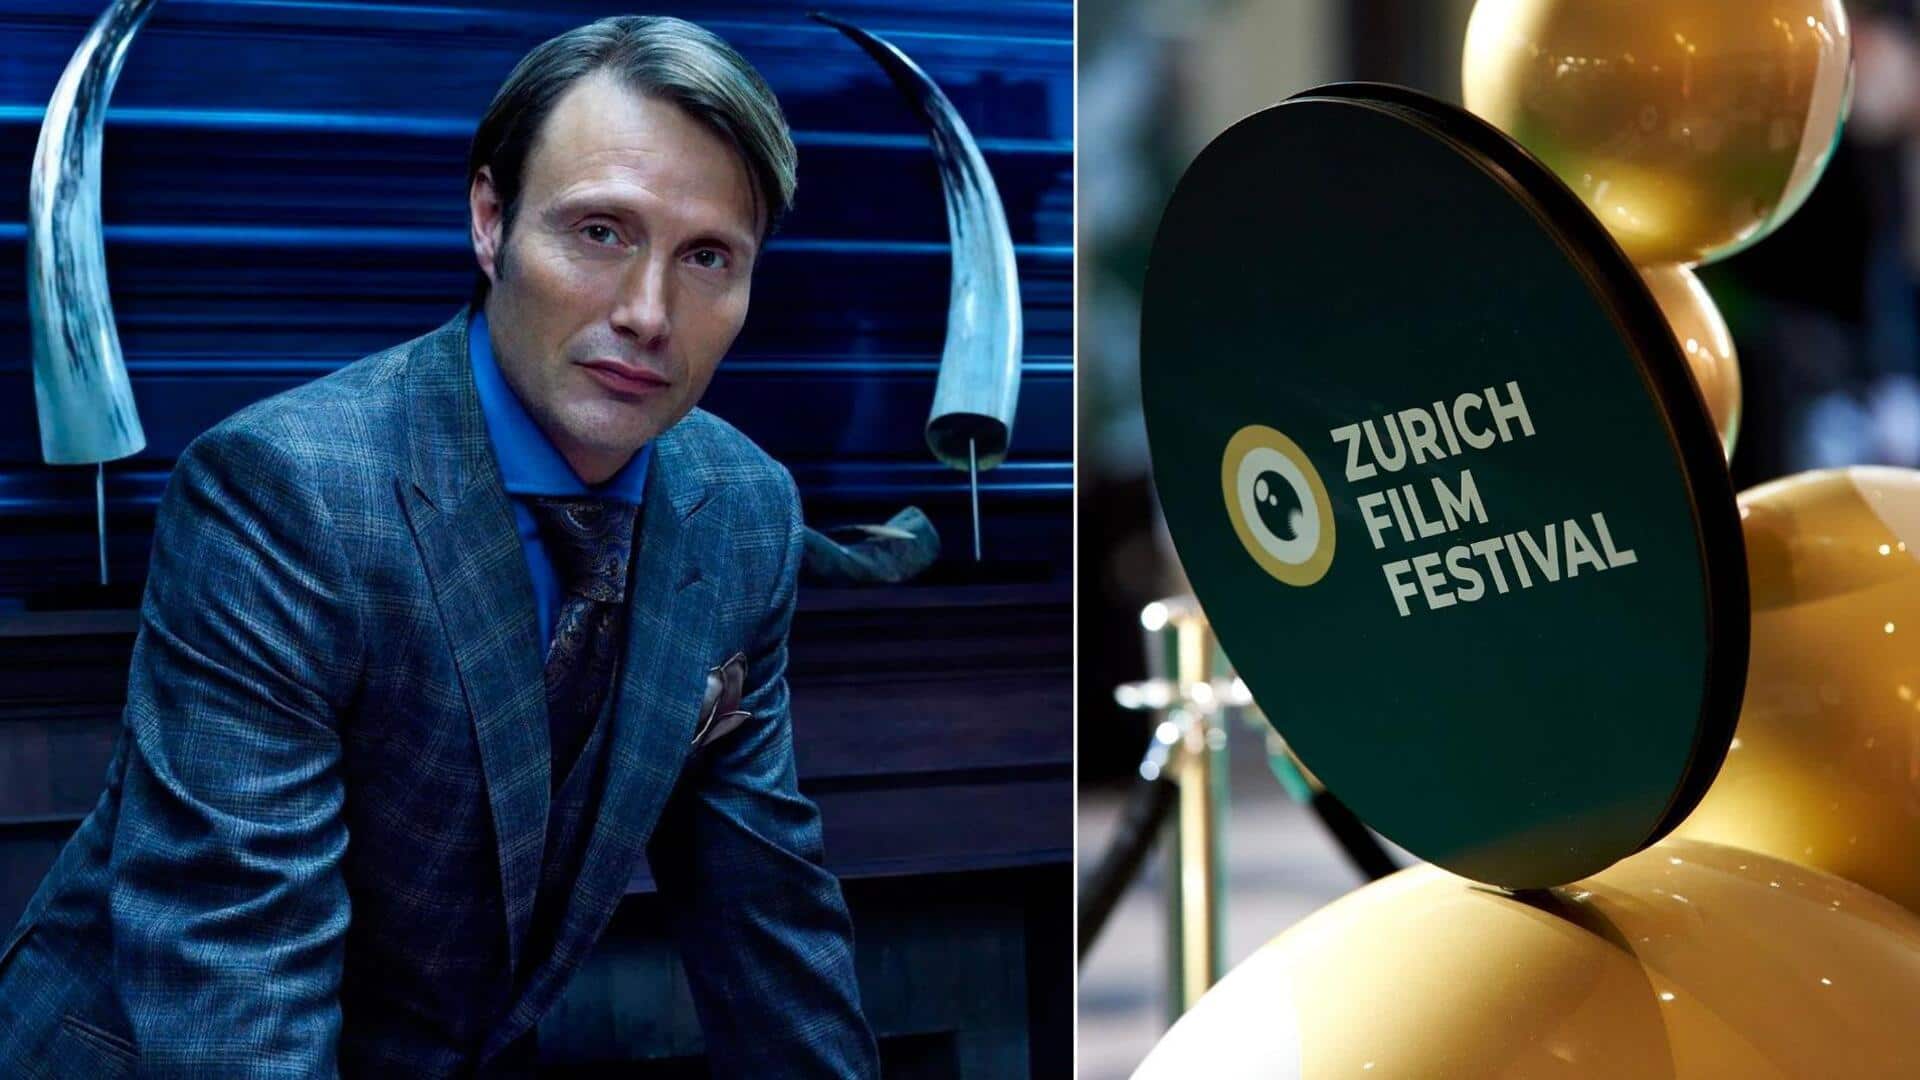 ZFF 2023 to honor Mads Mikkelsen with Golden Eye Award